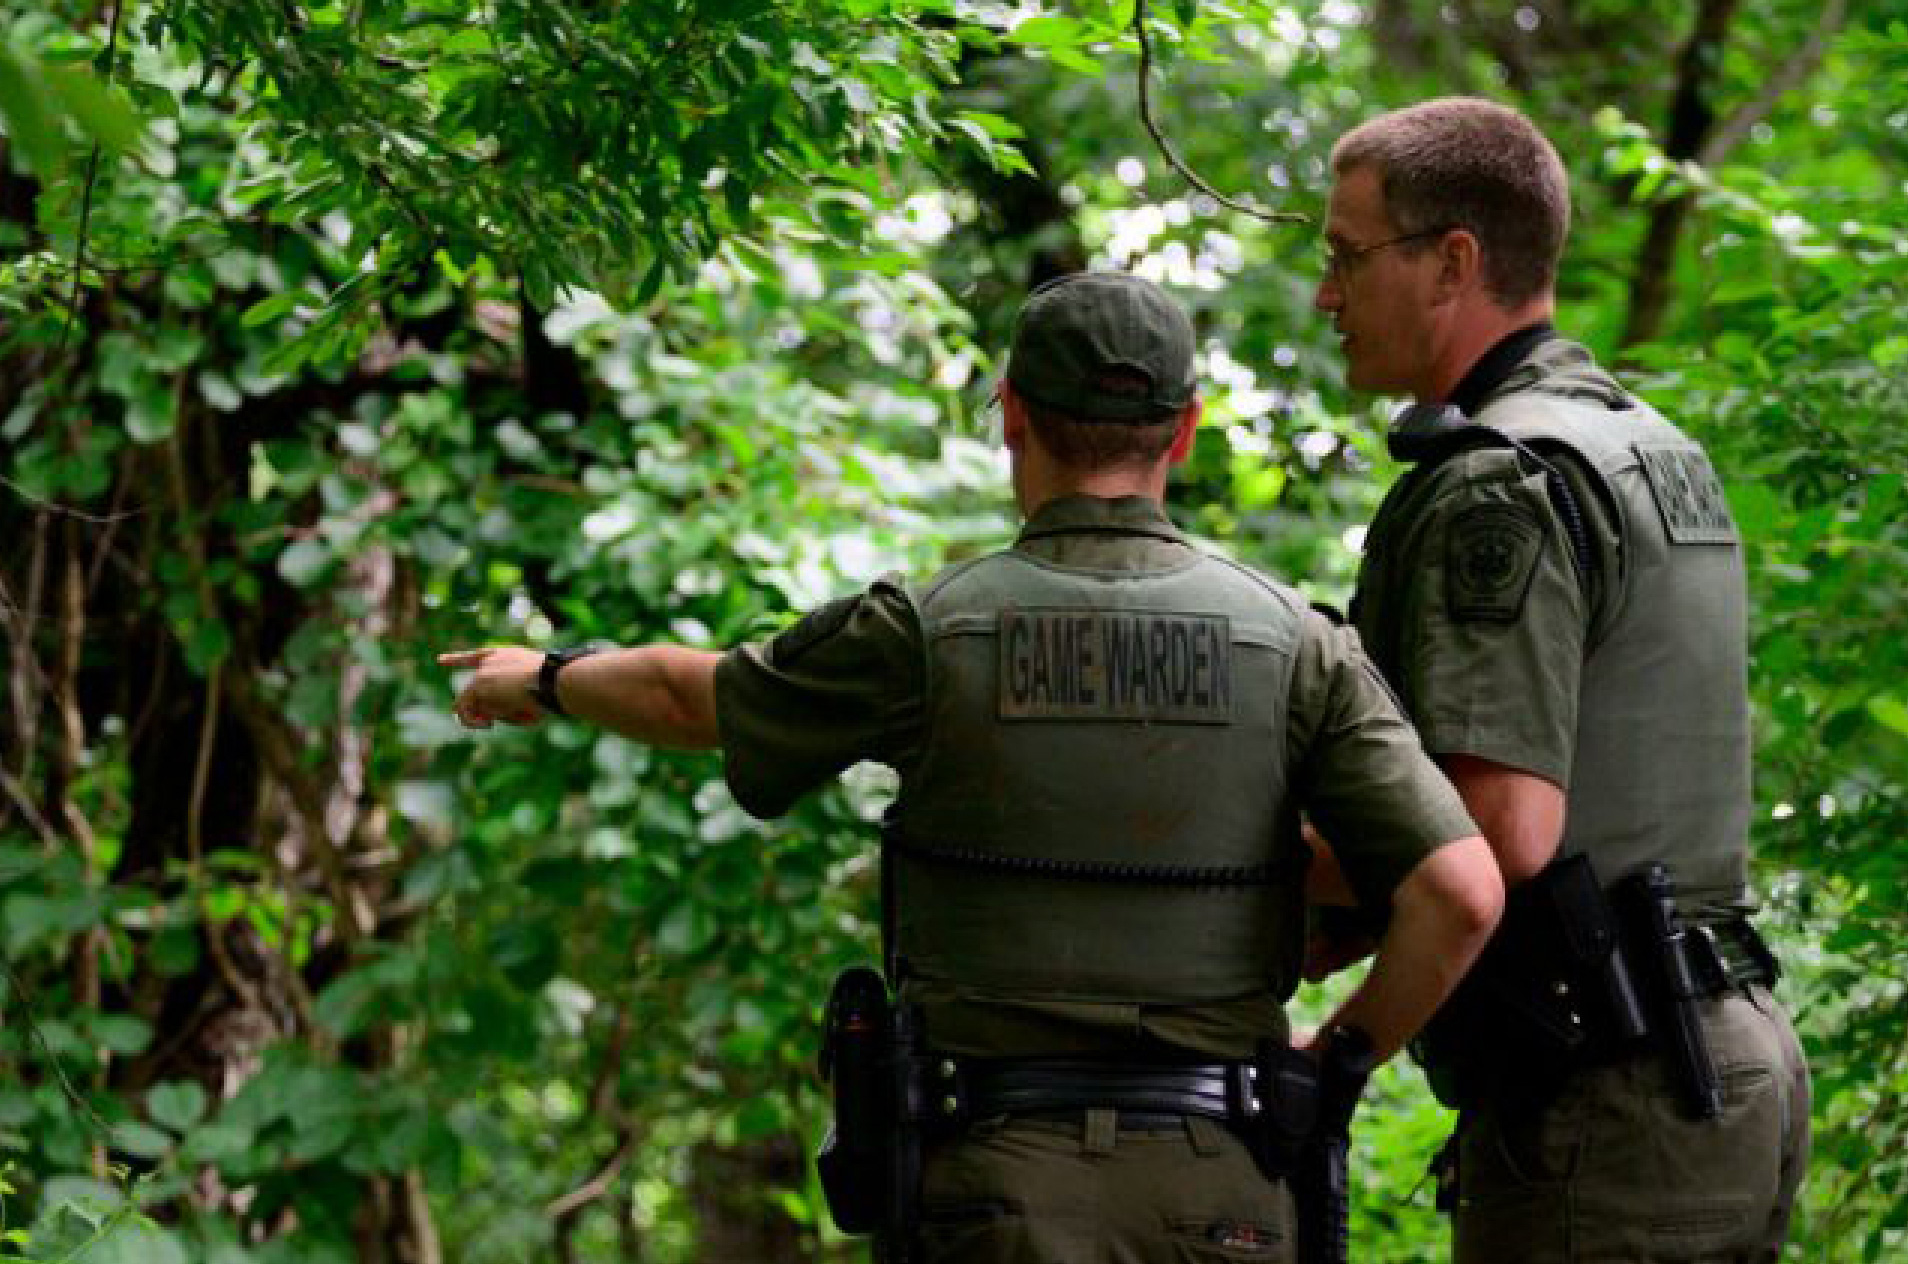 5 Things To Do When Being Checked by a Game Warden